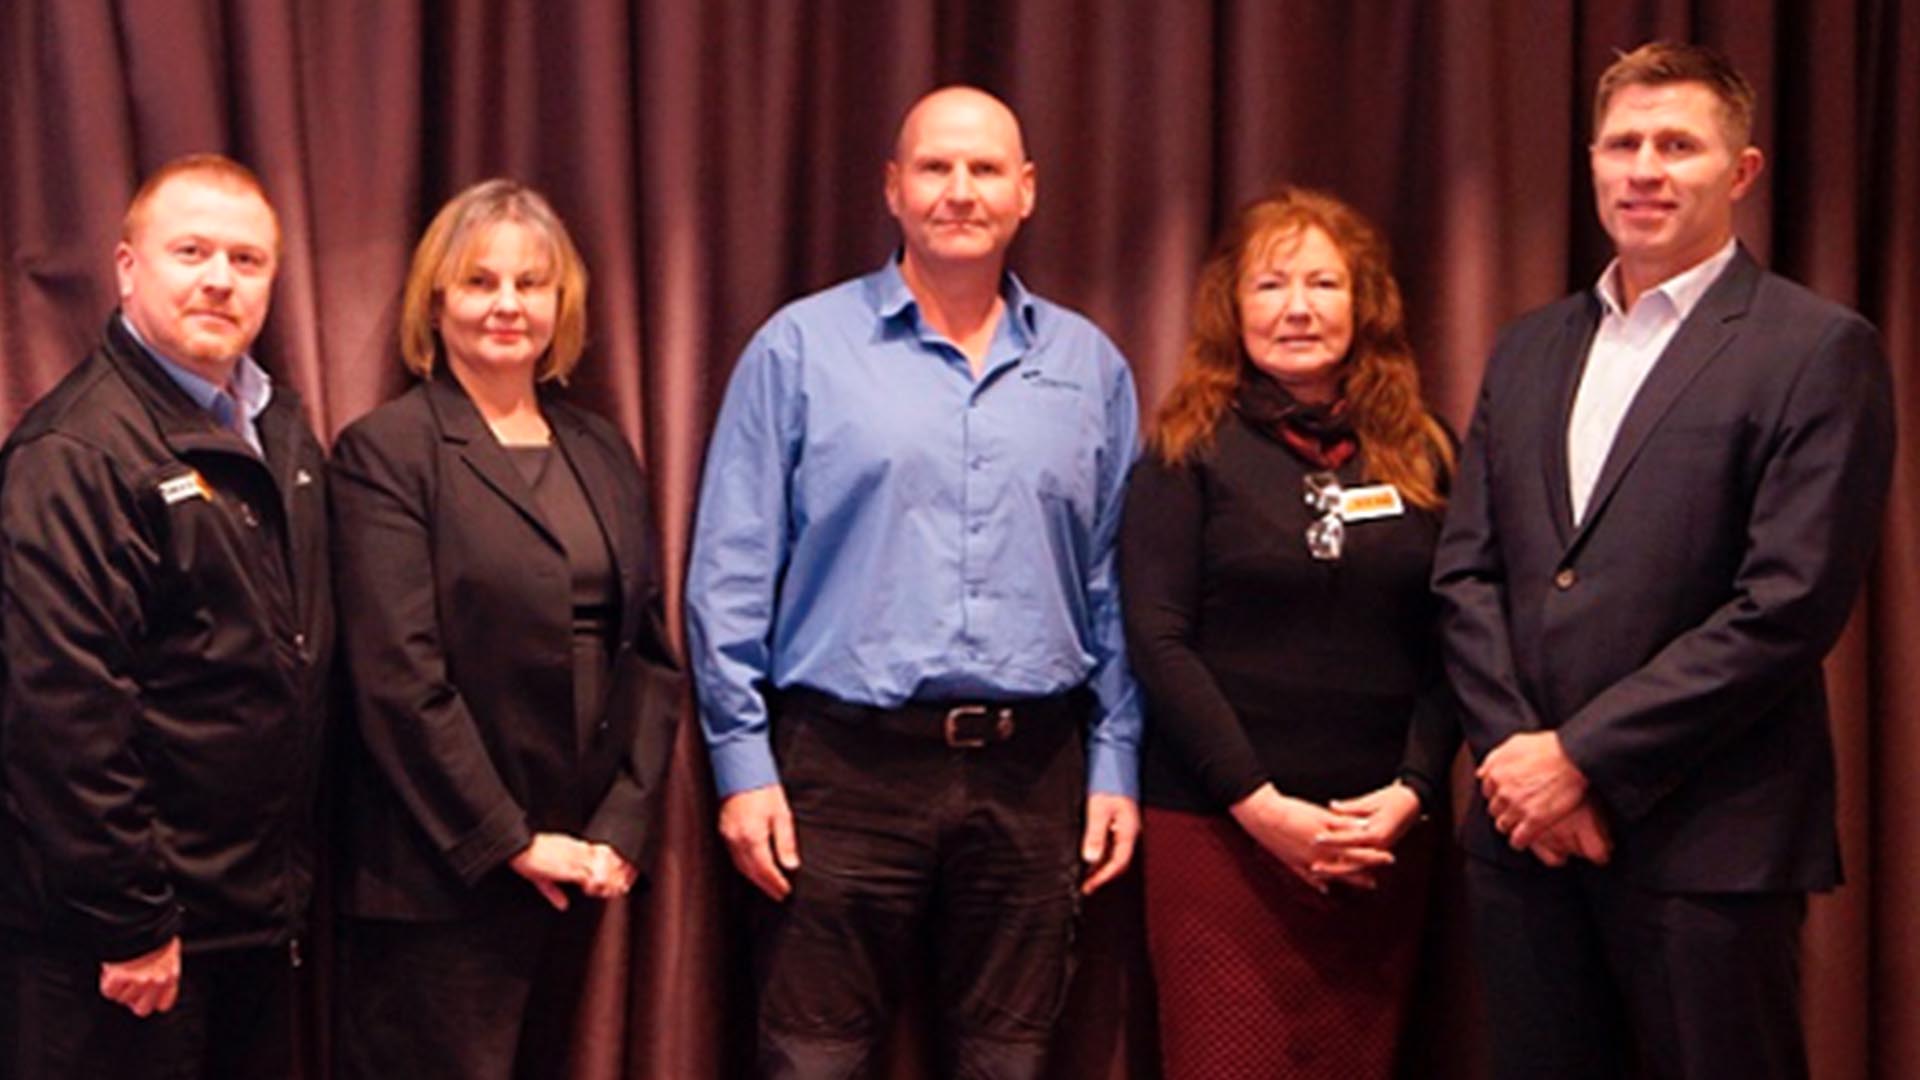 Dist. Prof. Helen Lingard presented alongside industry representatives and the WorkSafe Tasmania Inspectorate at the Better Work Tasmania networking session on 29 June 2016. Pictured (l to r): Paul Kitchener (WorkSafe Tasmania), Dist. Prof. Helen Lingard (RMIT), Glen Sutton, Pamela Atkinson (WorkSafe Tasmania) and Julian Proud (Hansen Yuncken).